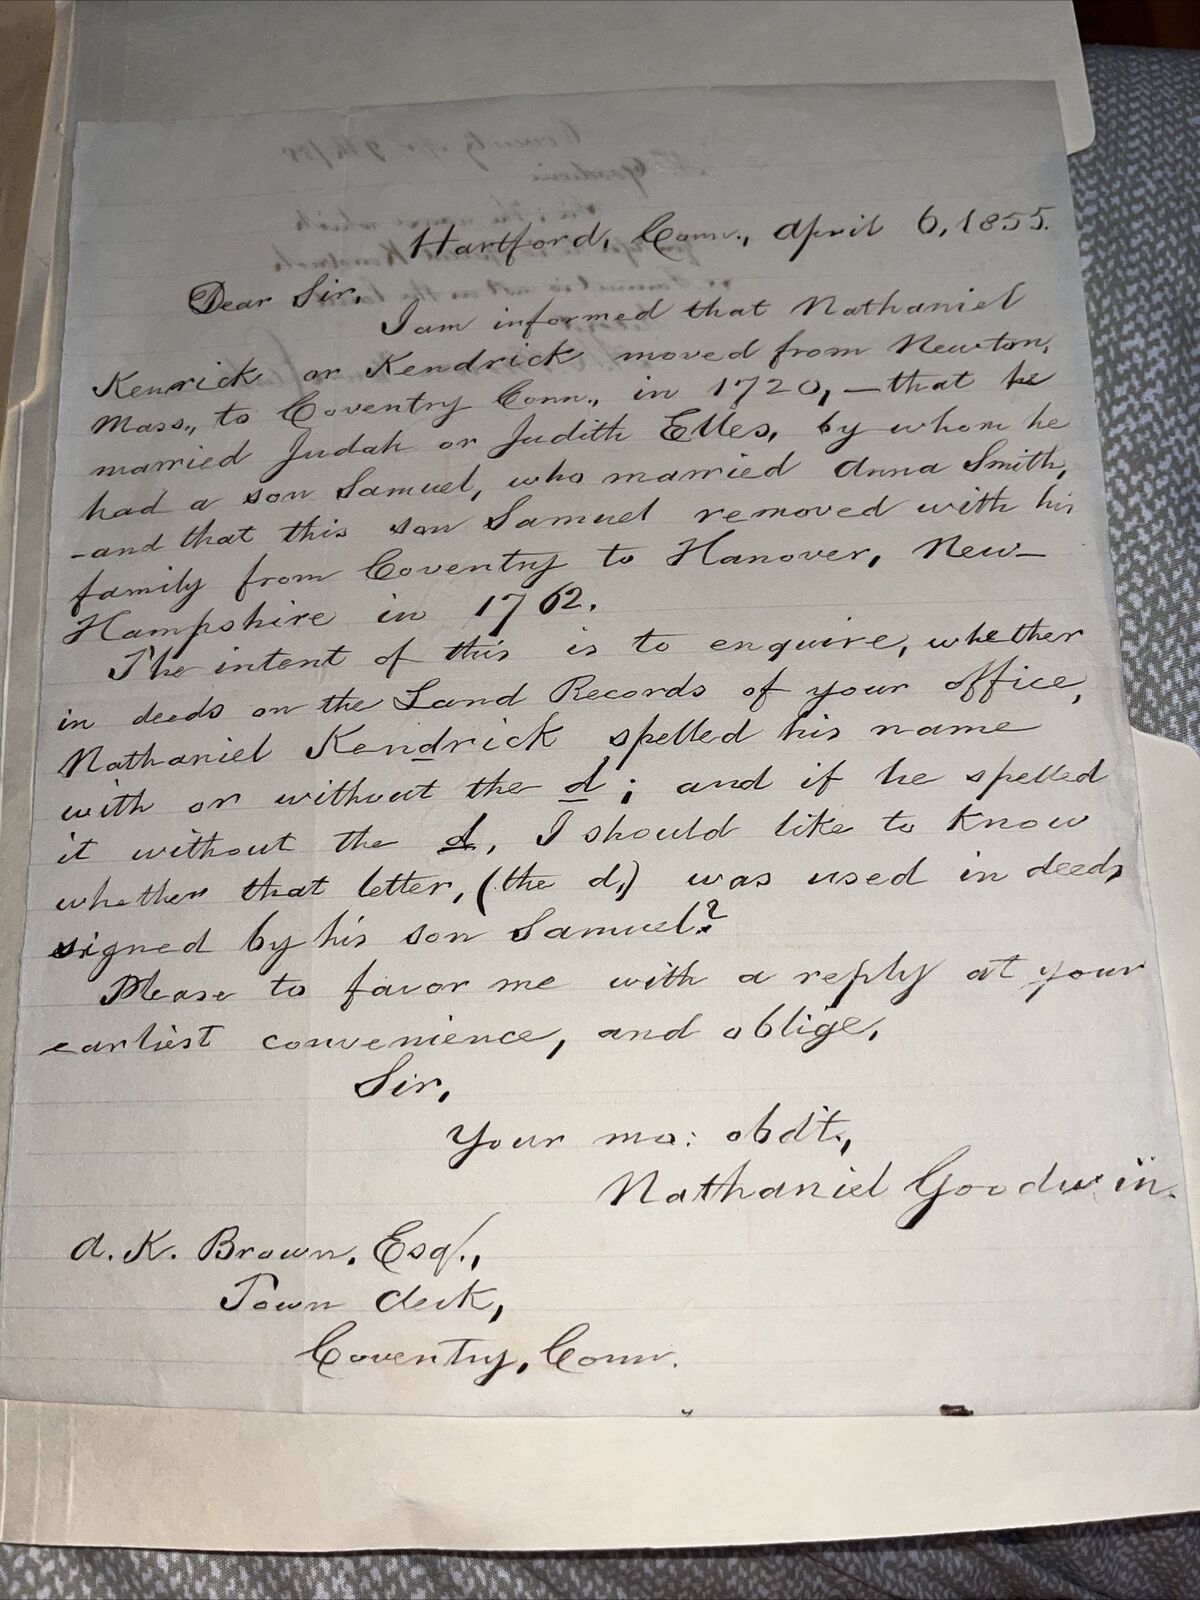 1855 Hartford Genealogist Letter to Coventry CT Town Clerk on Nathaniel Kendrick